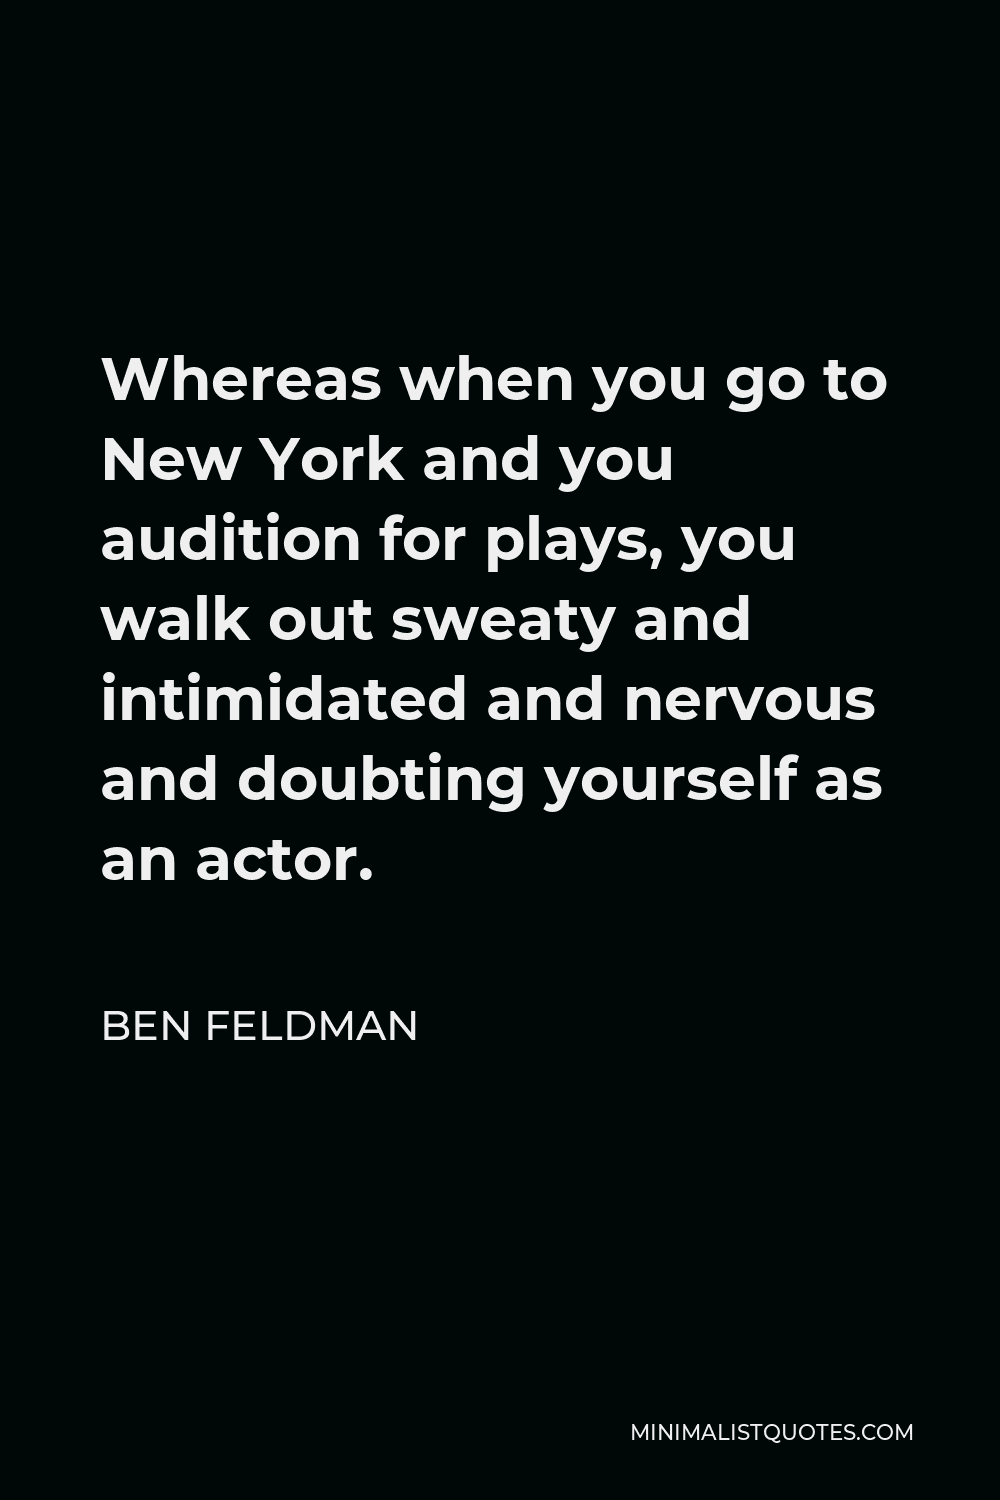 Ben Feldman Quote - Whereas when you go to New York and you audition for plays, you walk out sweaty and intimidated and nervous and doubting yourself as an actor.